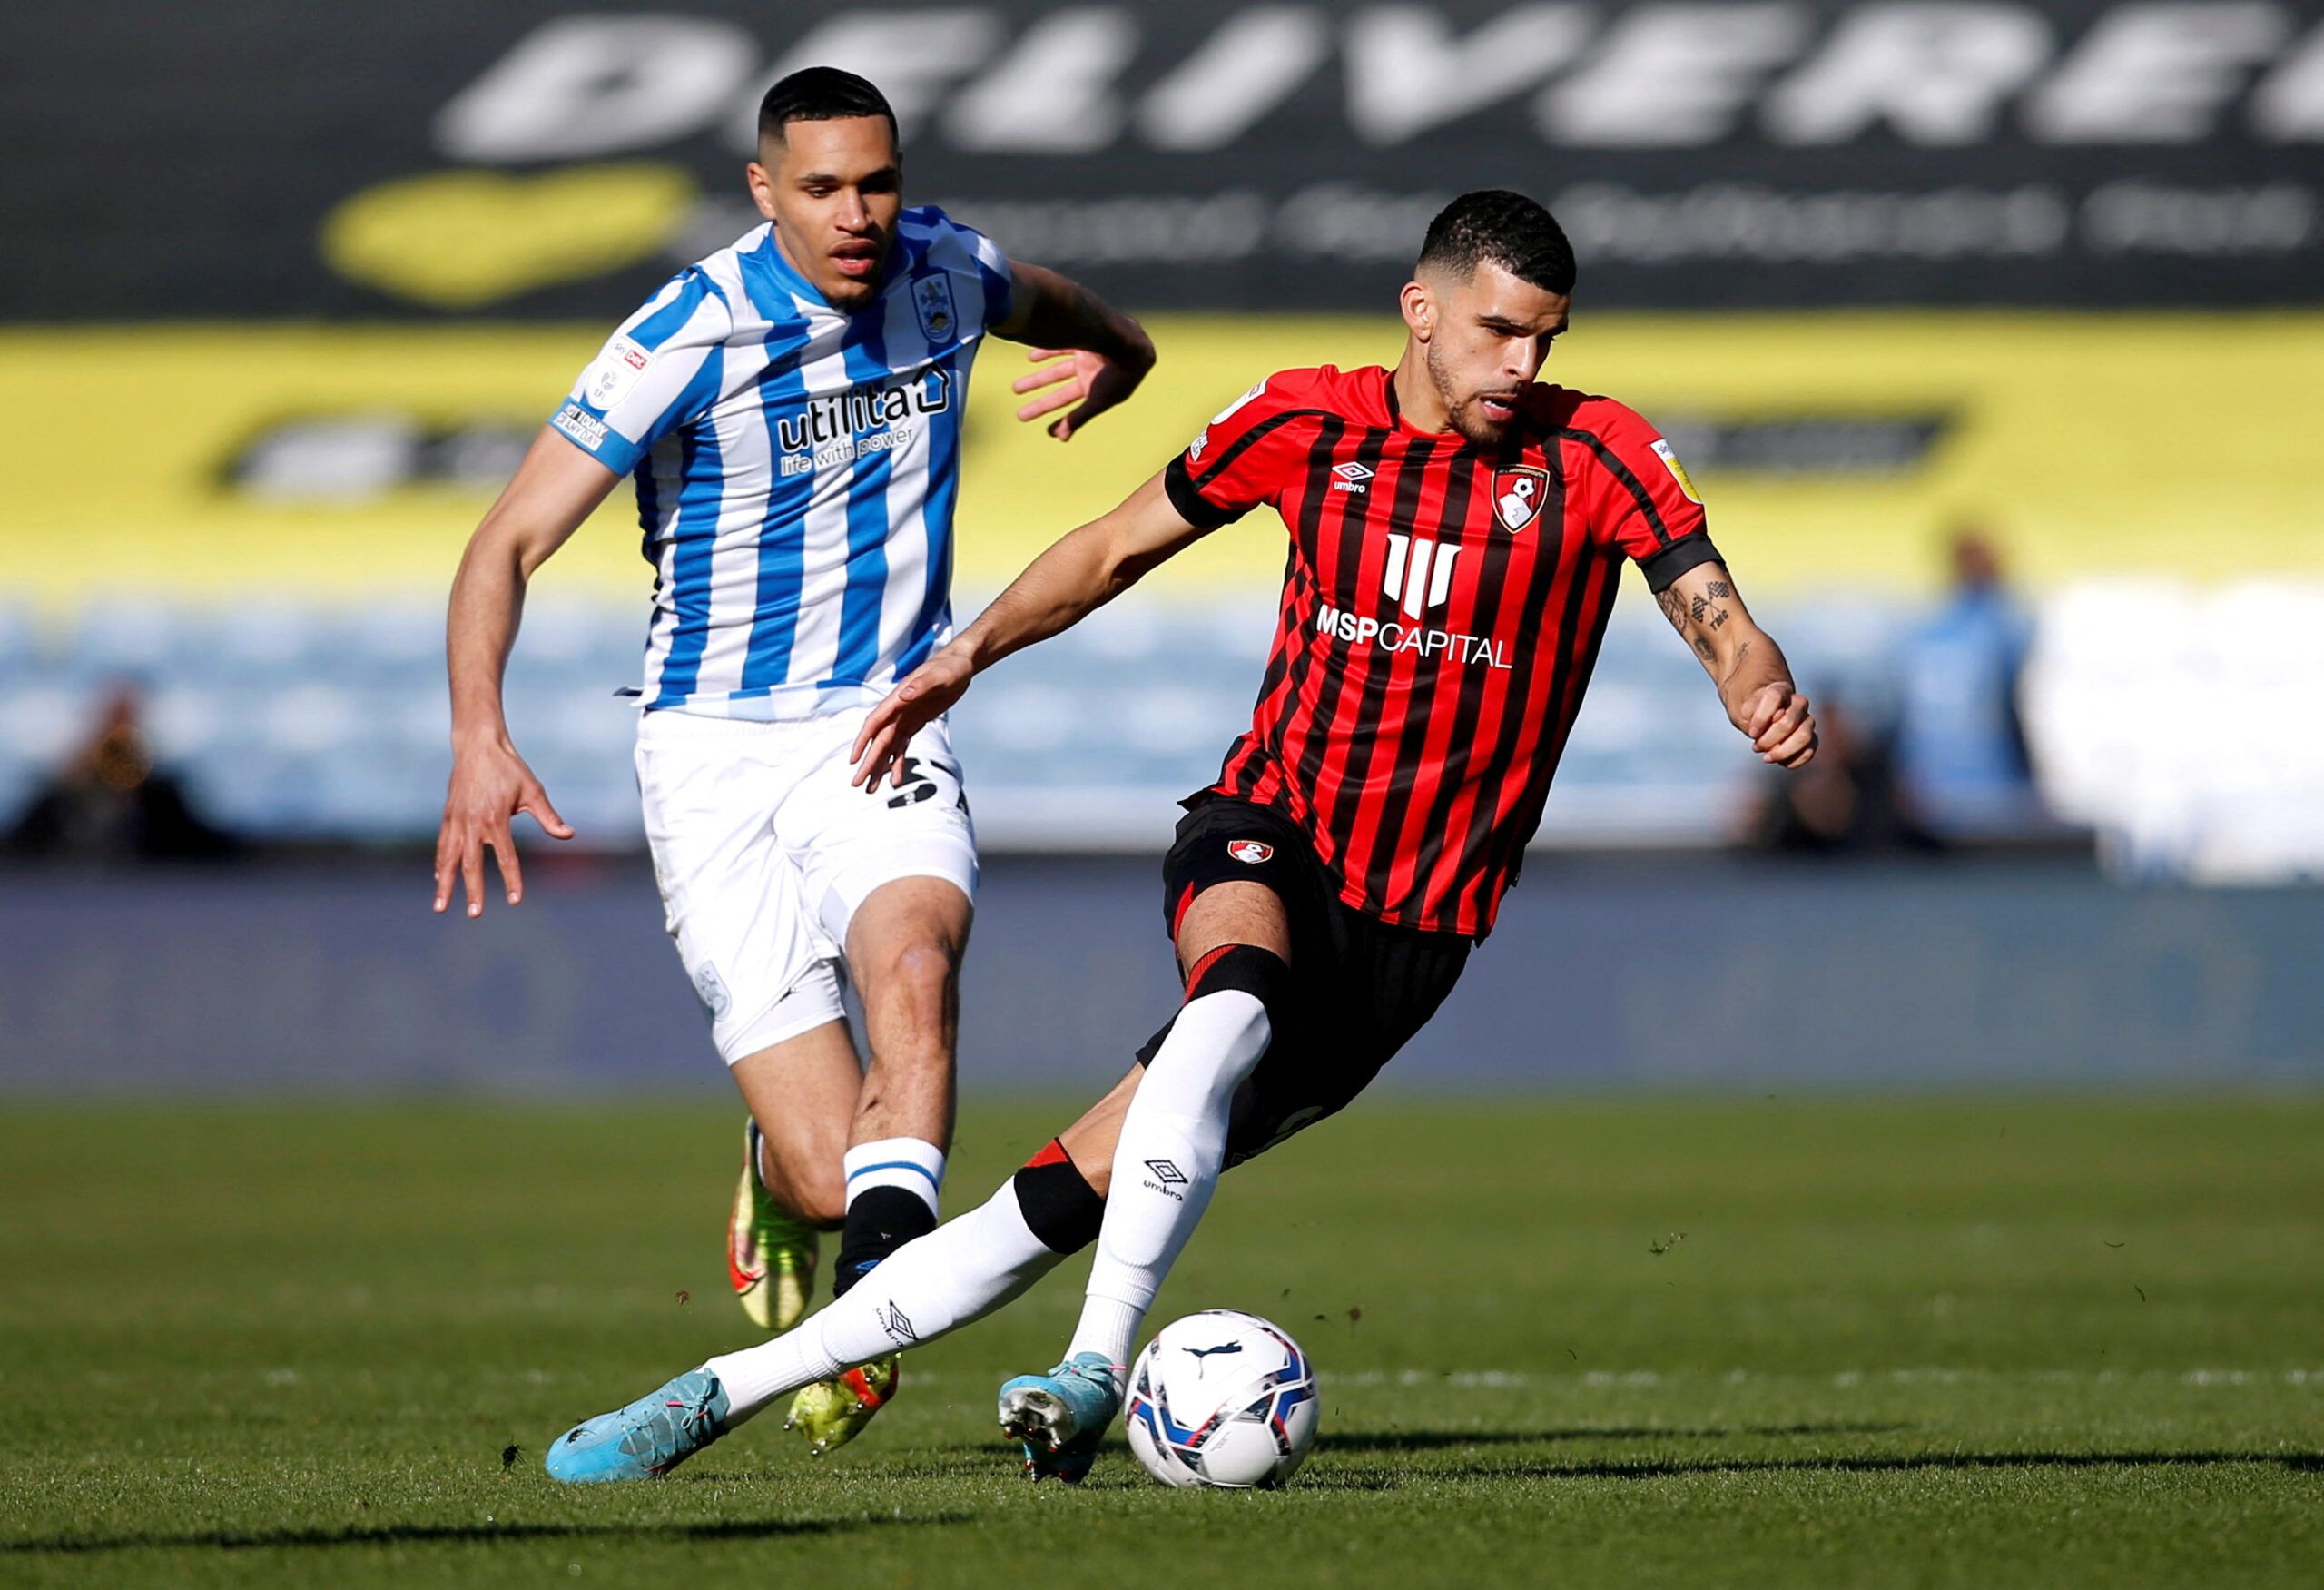 Soccer Football - Championship - Huddersfield Town v AFC Bournemouth - John Smith's Stadium, Huddersfield, Britain - March 19, 2022 AFC Bournemouth's Dominic Solanke in action with Huddersfield Town's Jon Russell  Action Images/Ed Sykes  EDITORIAL USE ONLY. No use with unauthorized audio, video, data, fixture lists, club/league logos or 